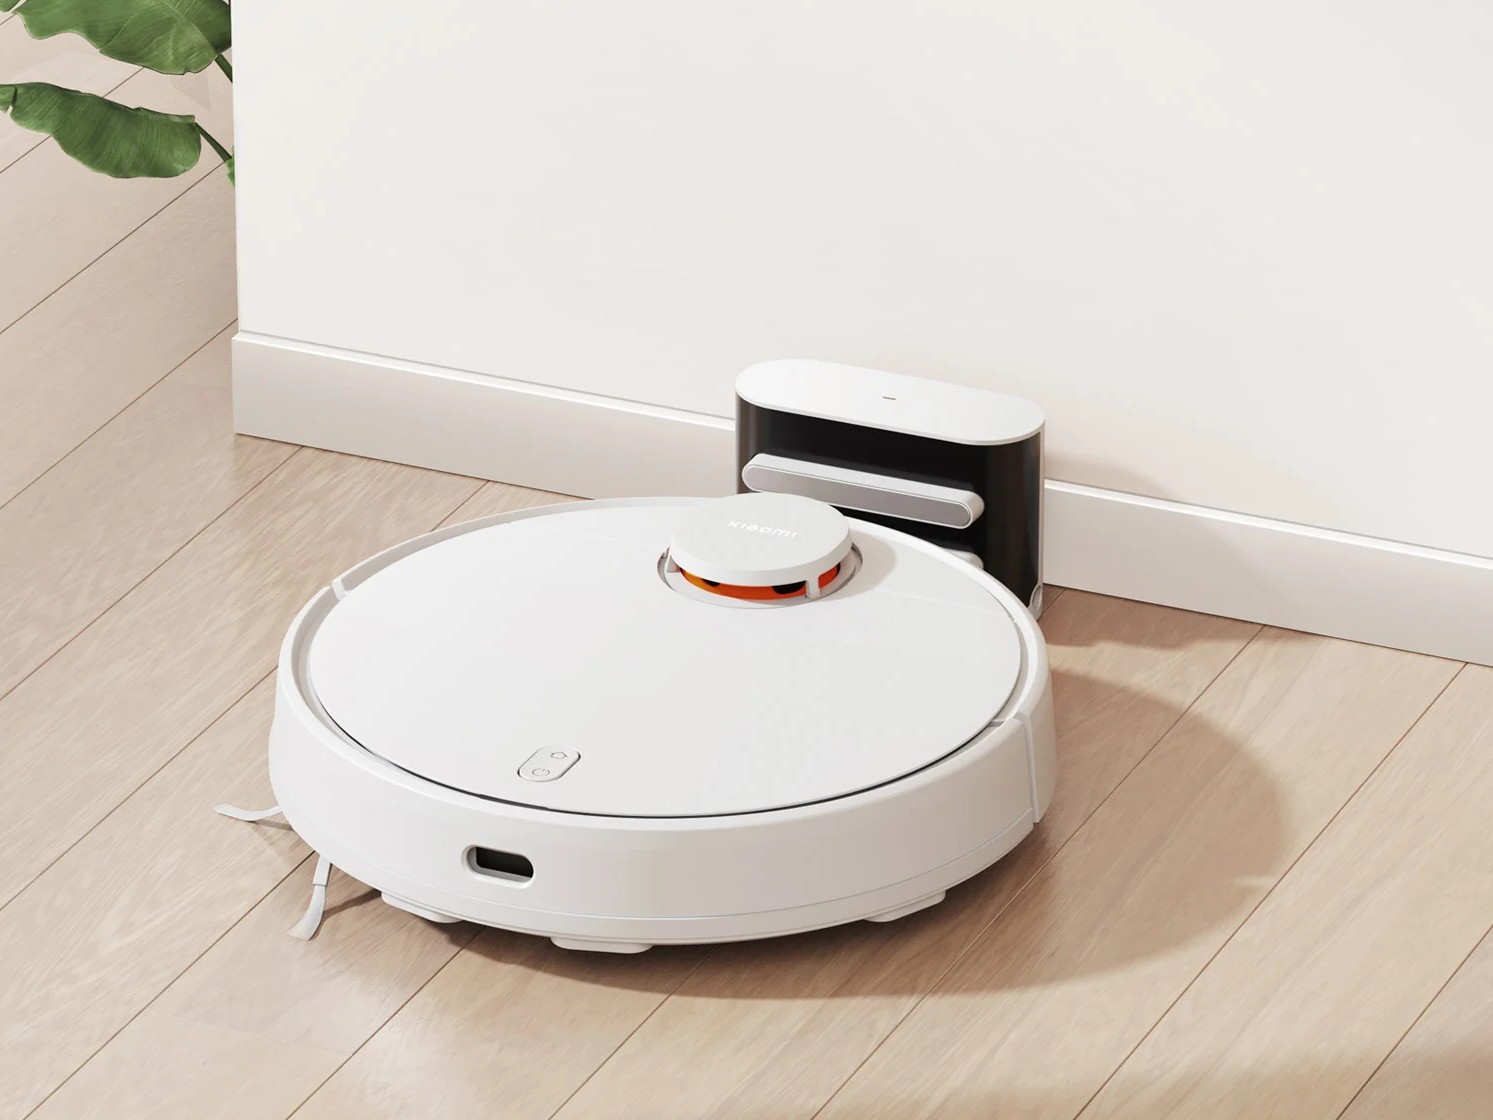 Xiaomi S10+, S12 and E12 robot vacuums now available